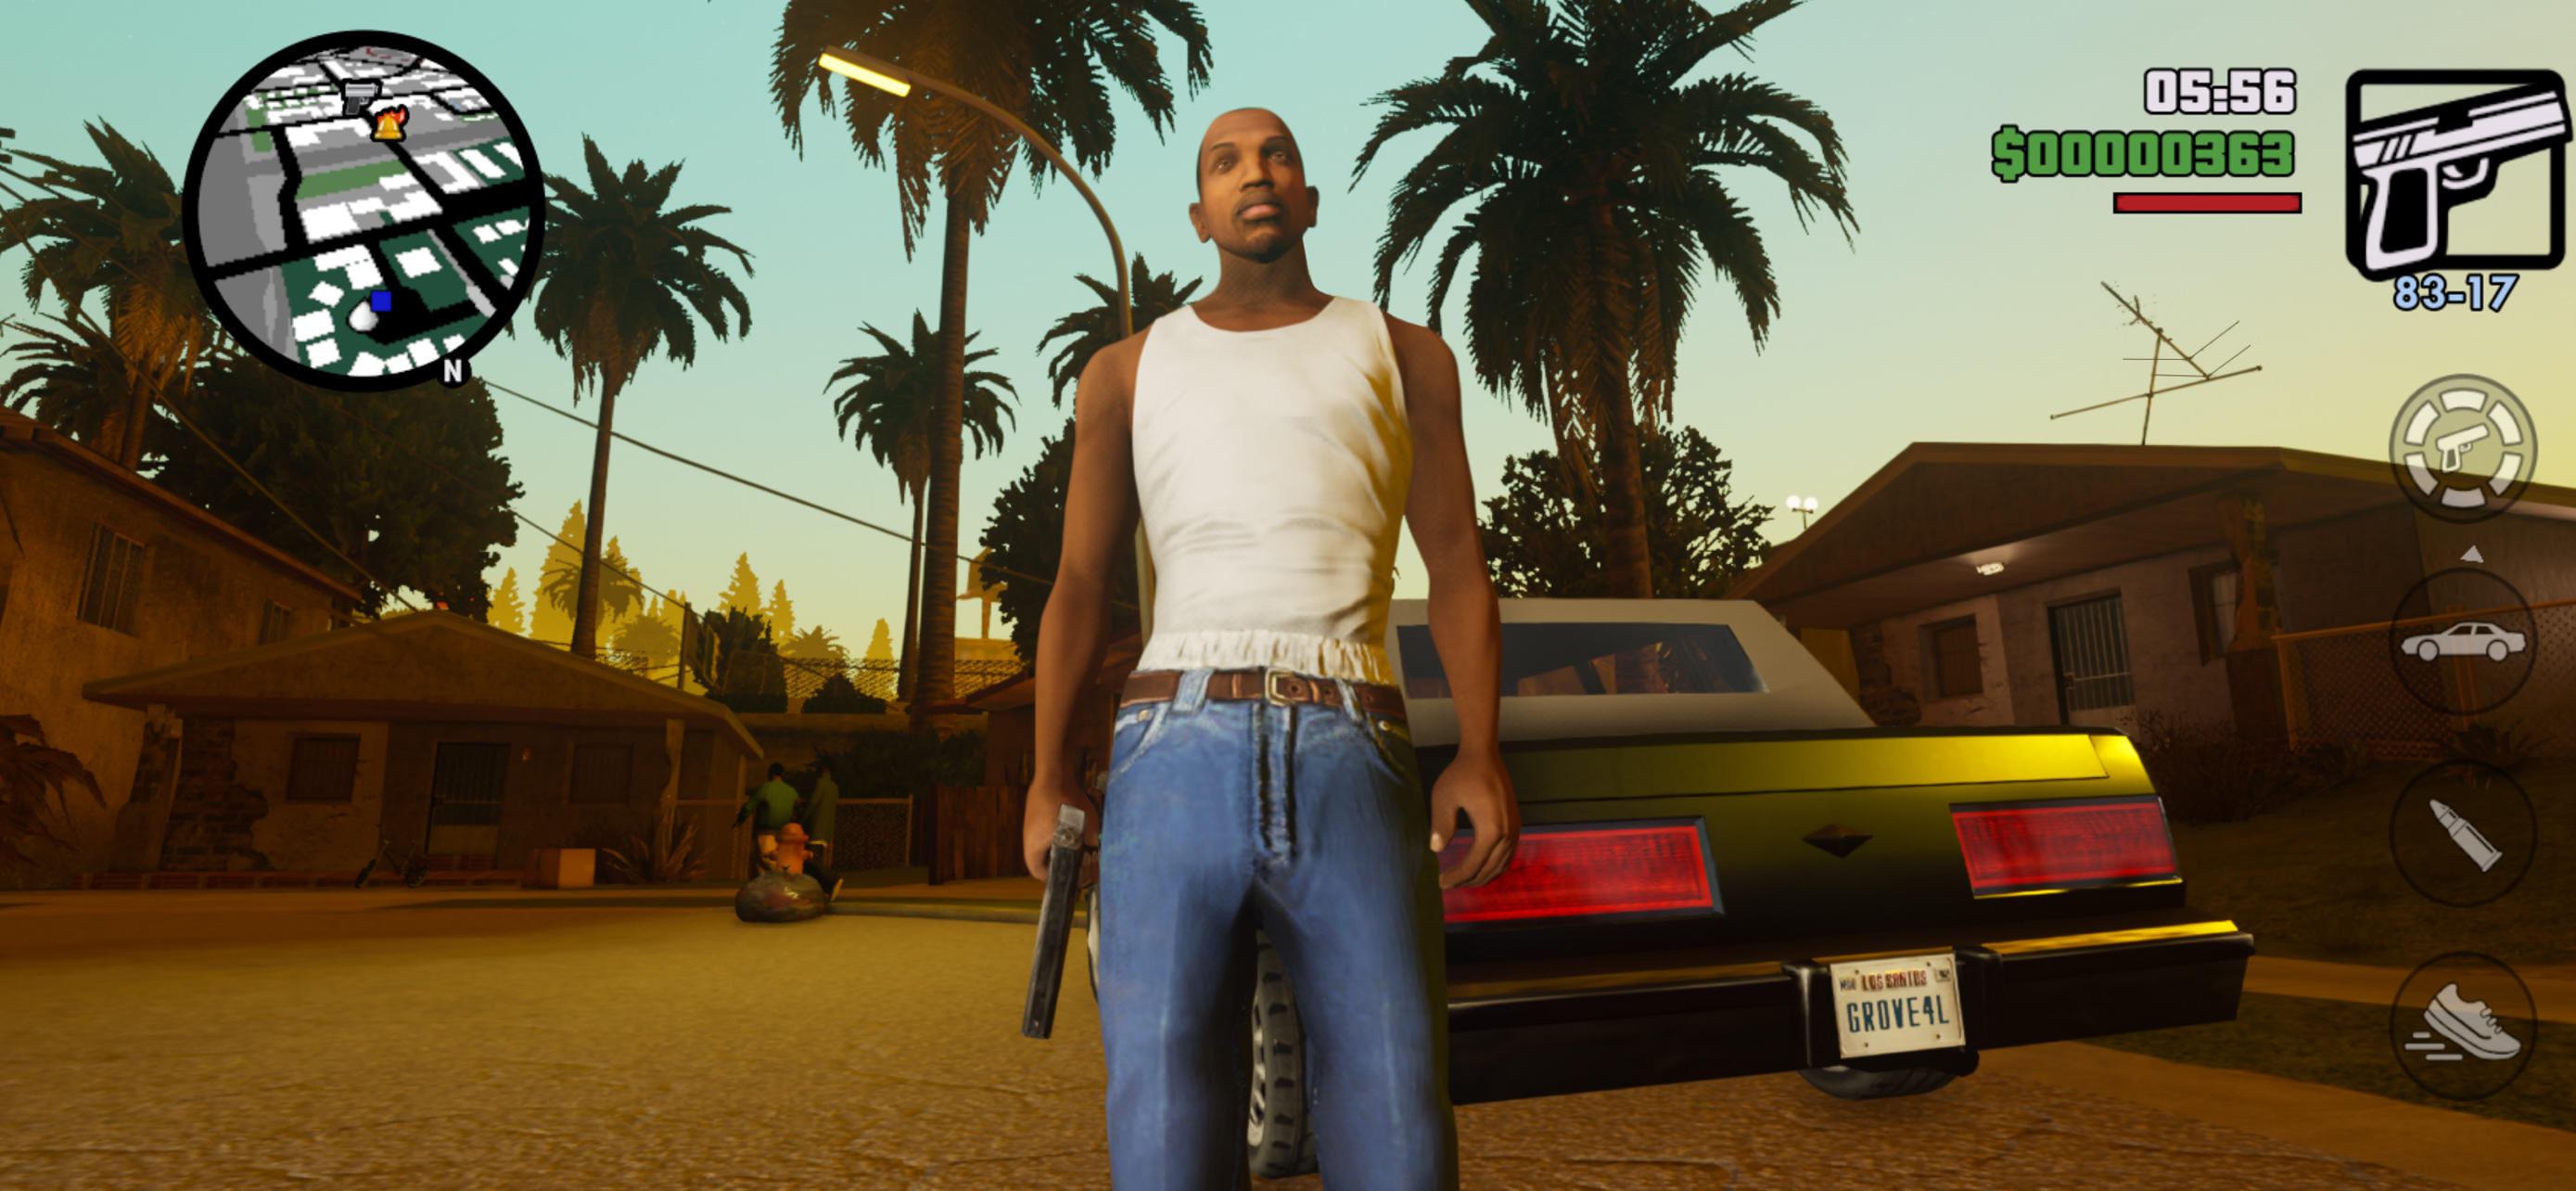 Download GTA Trilogy from Netflix for Android, iOS, and PC [GTA